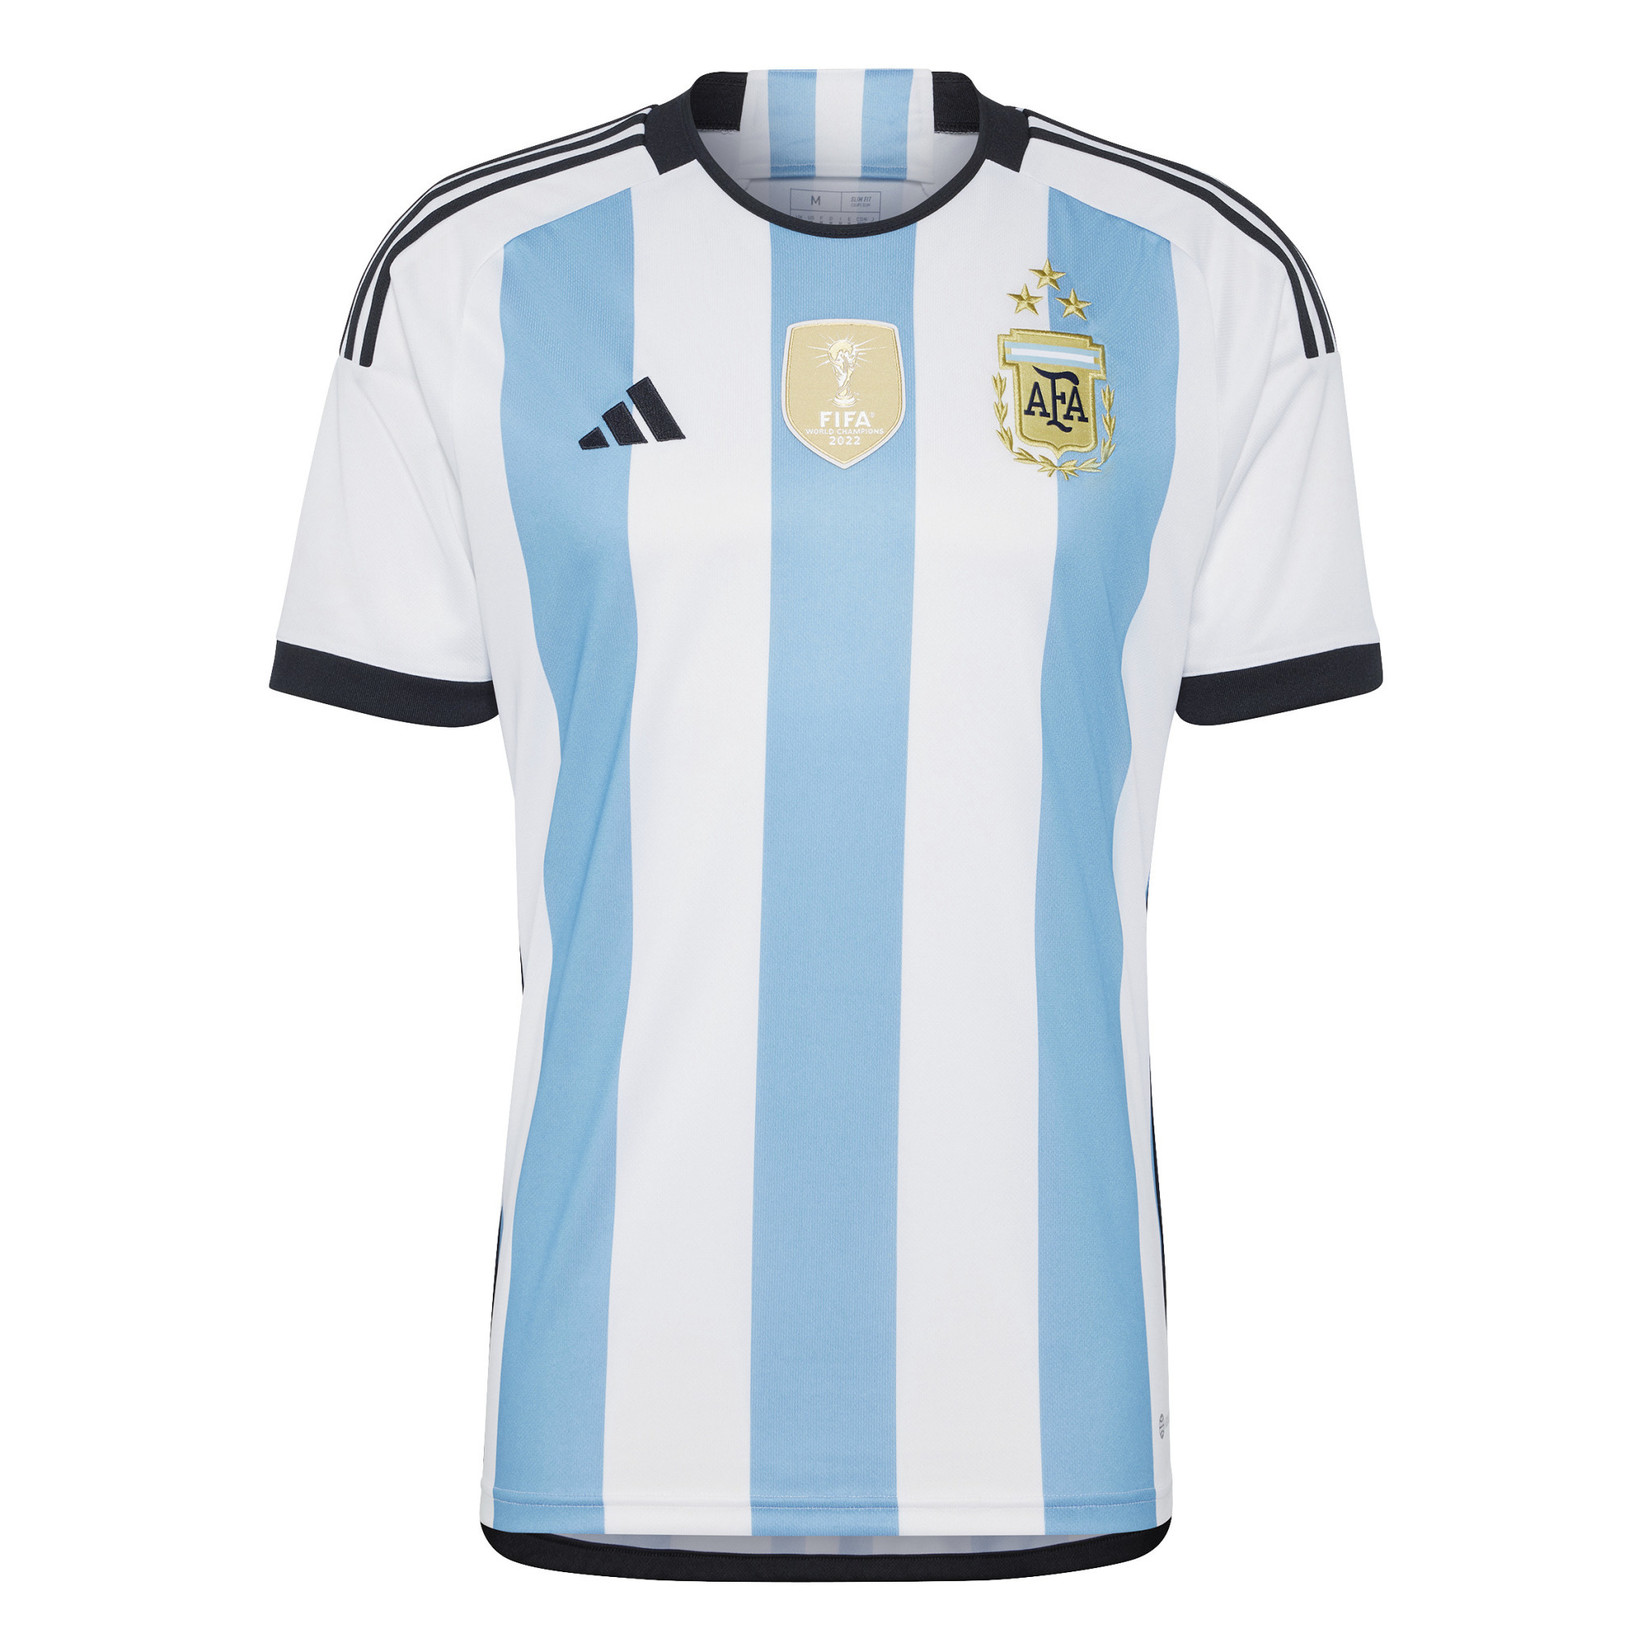 ADIDAS ARGENTINA 2022 WINNERS HOME JERSEY (WHITE/BLUE)